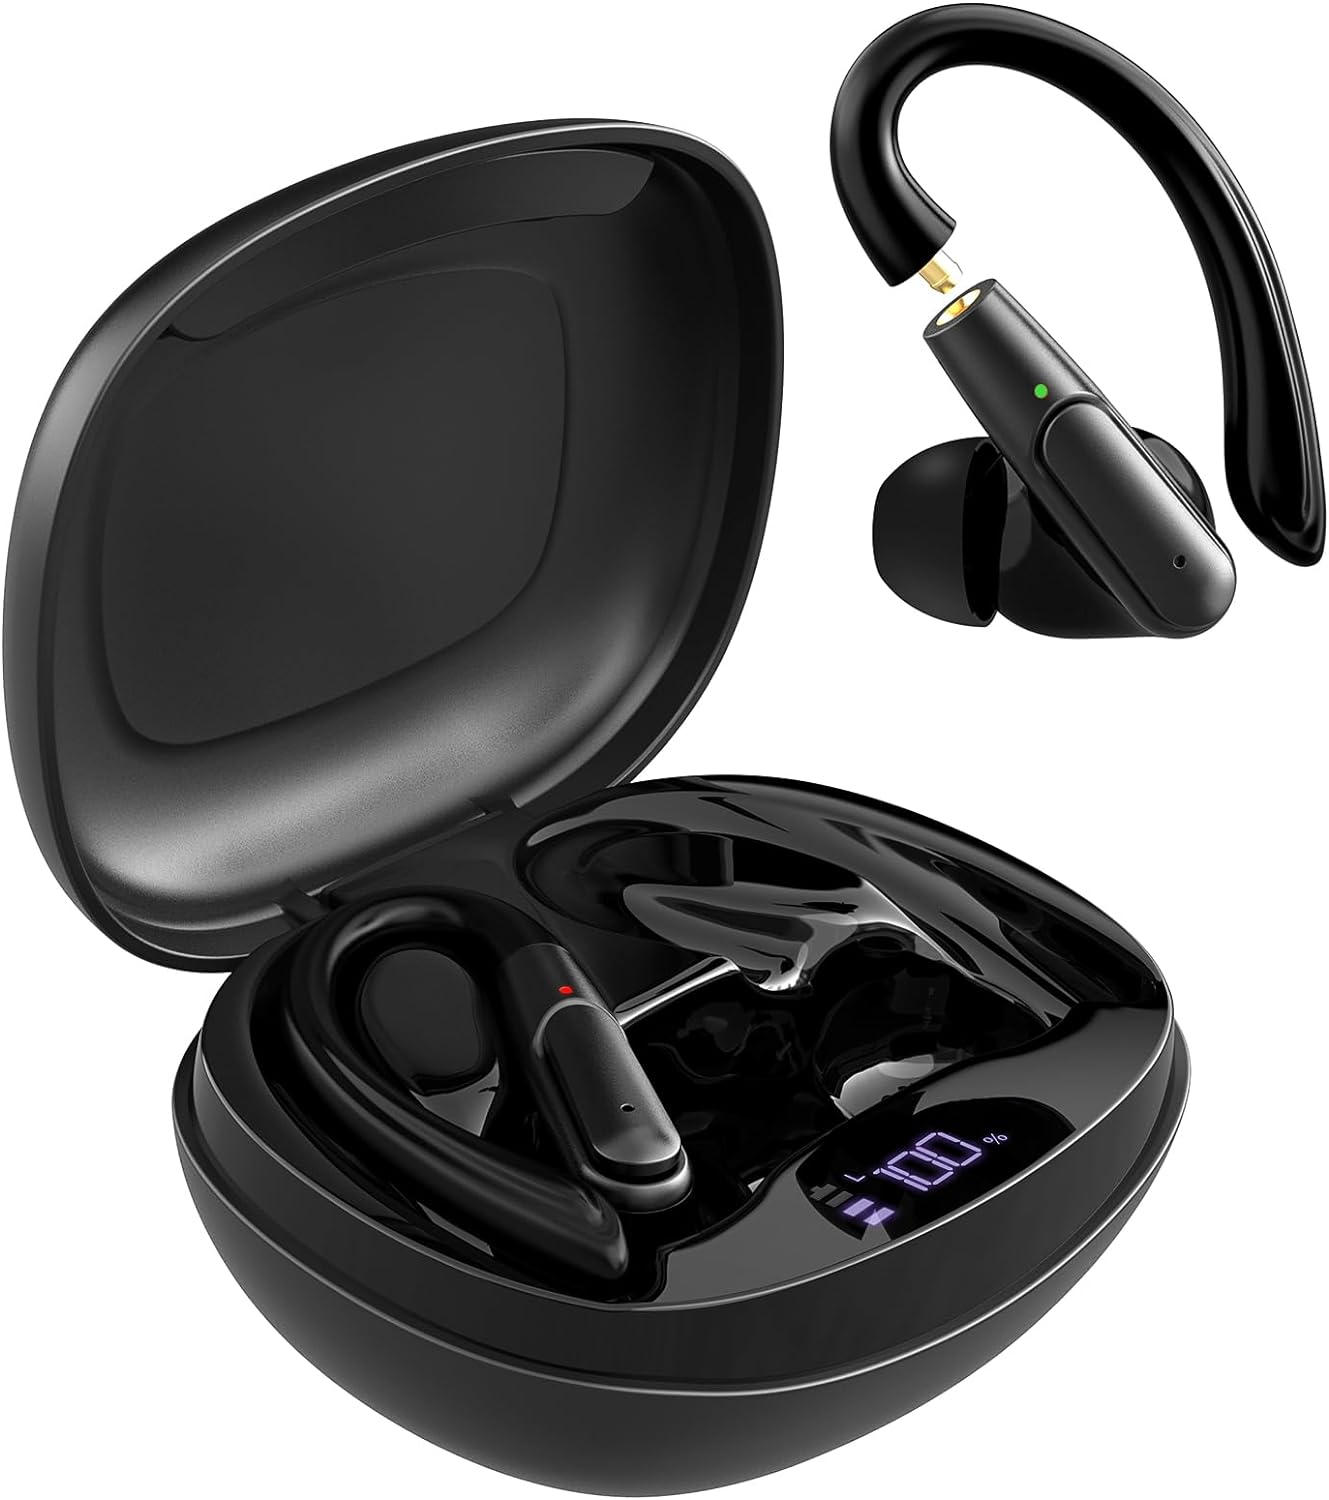 APEKX True Wireless in-Ear Bluetooth Earbuds - Effortlessly Switch Between Daily and Sports wear, Compatible with iPhone and Android, Perfect for Gym, Sports, Running and Gaming - Black